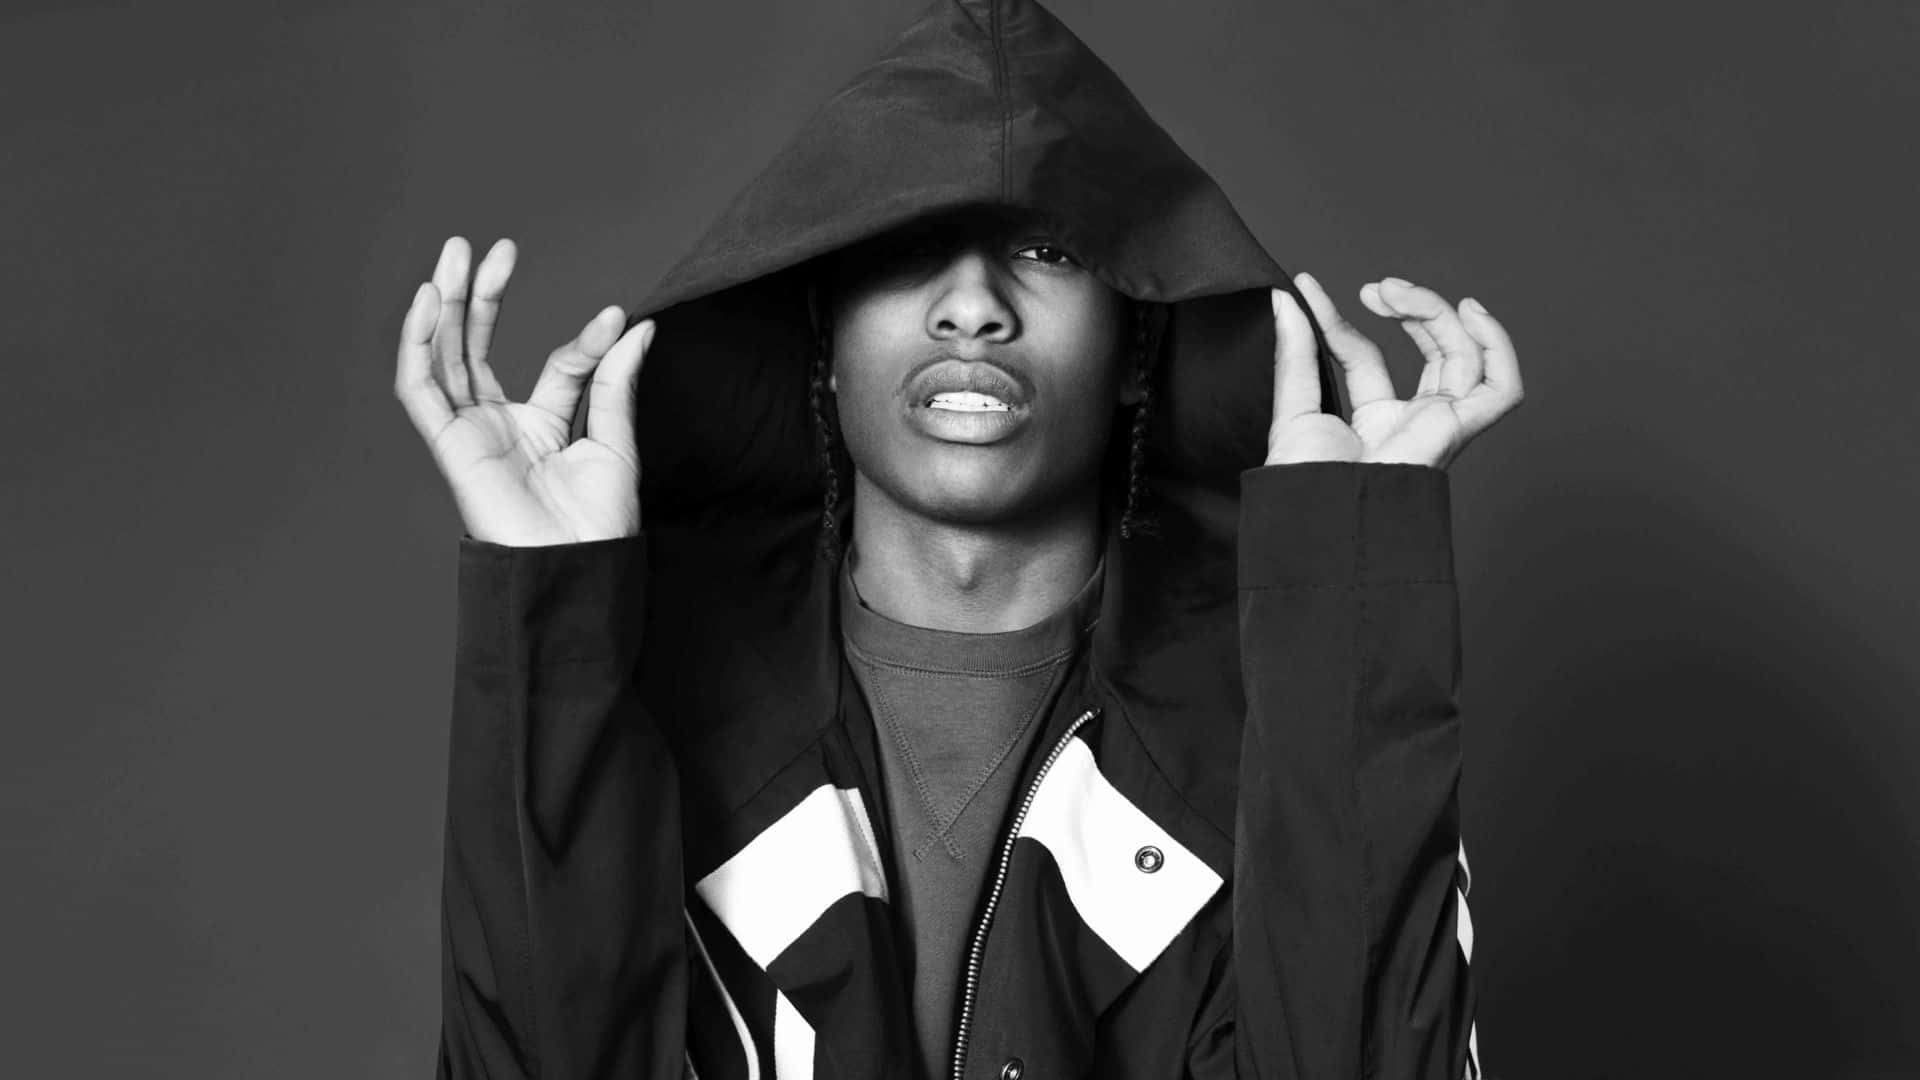 Rapper Asap Rocky poses for the camera